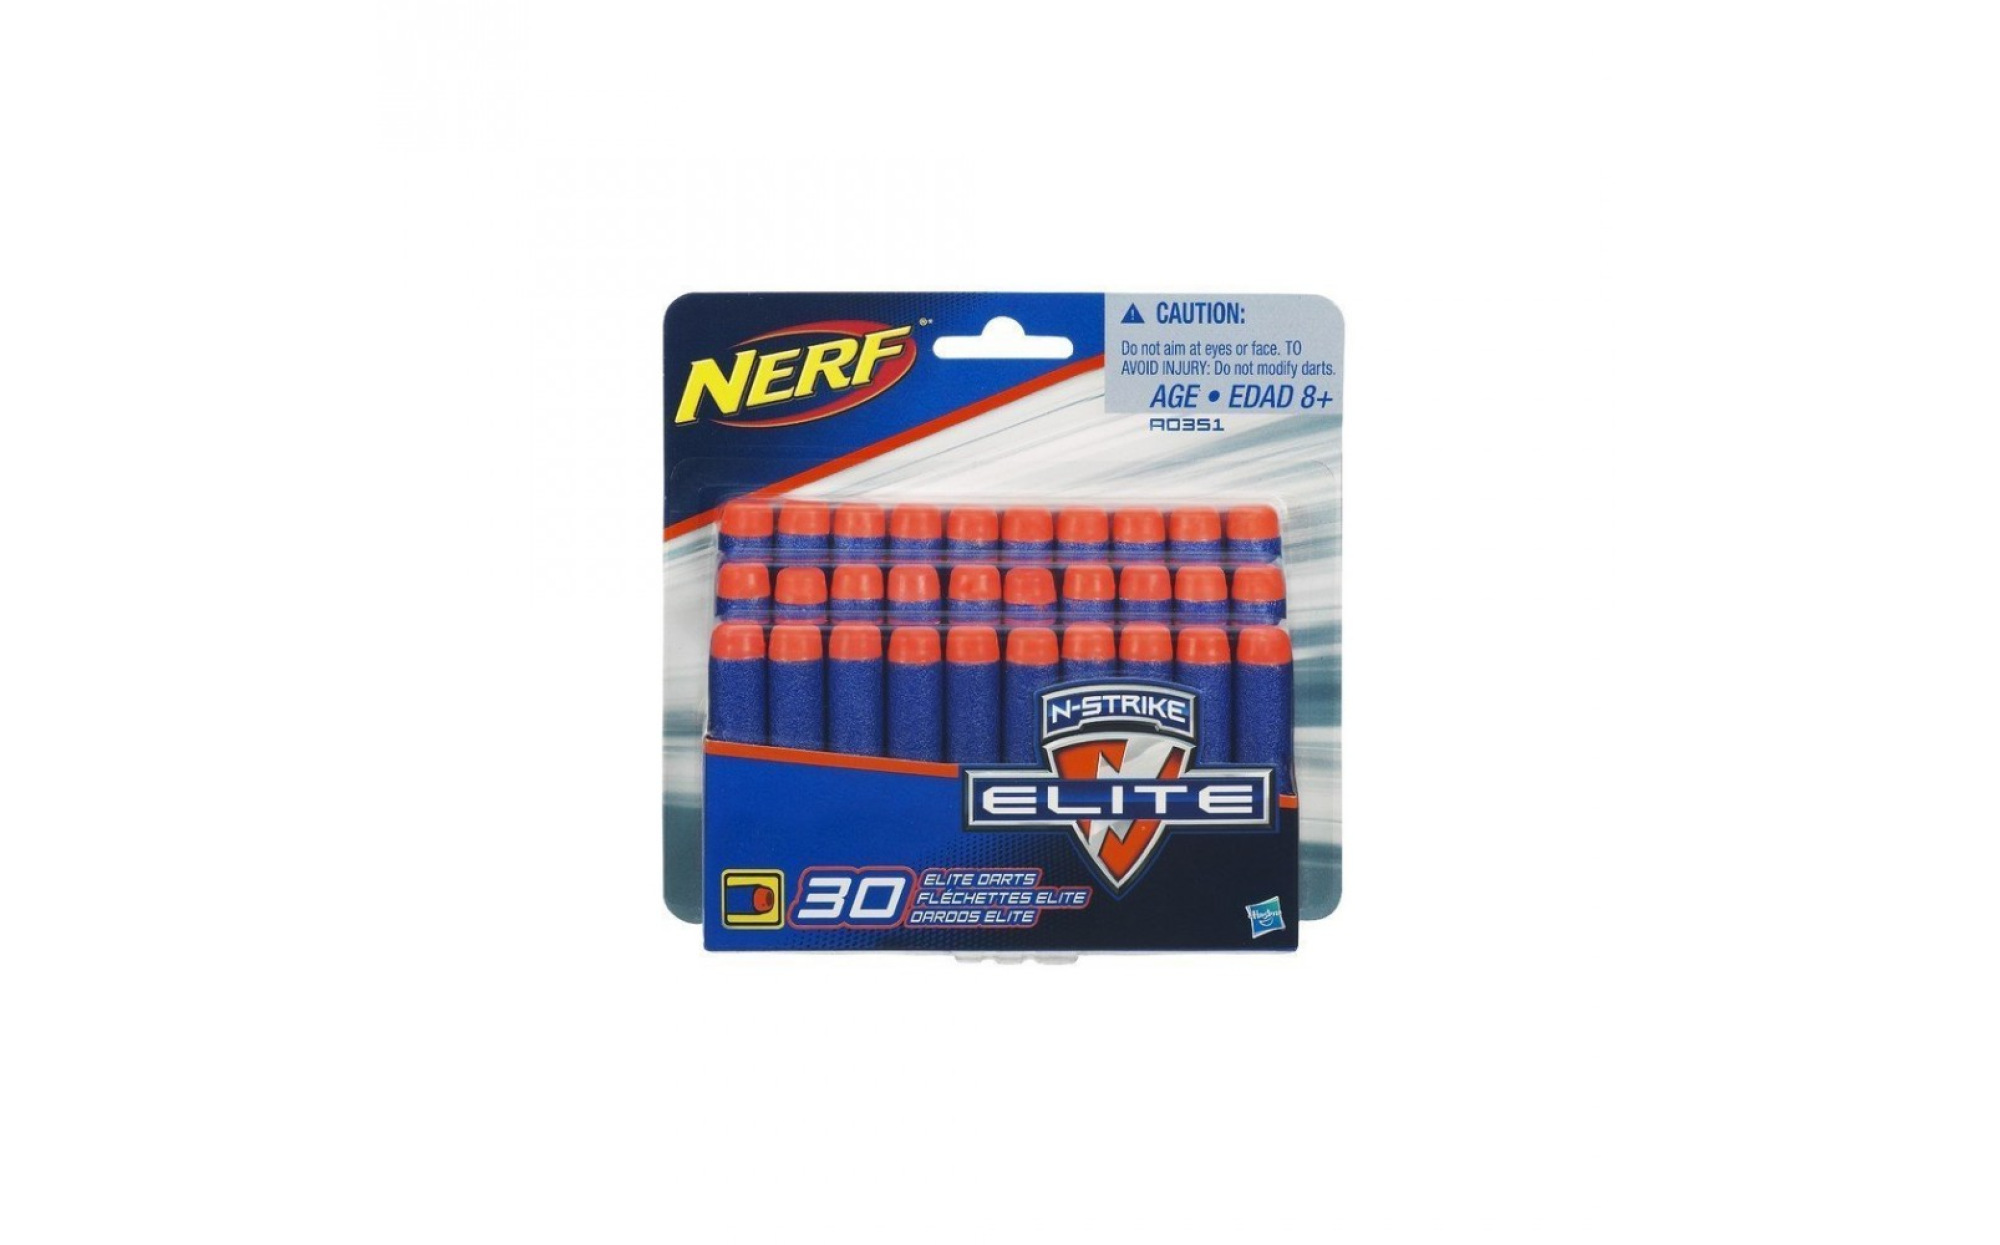 Theseus Foto lukker 30 Elite Darts for Nerf Dart Gun – Play Therapy Toys: Aggression Play